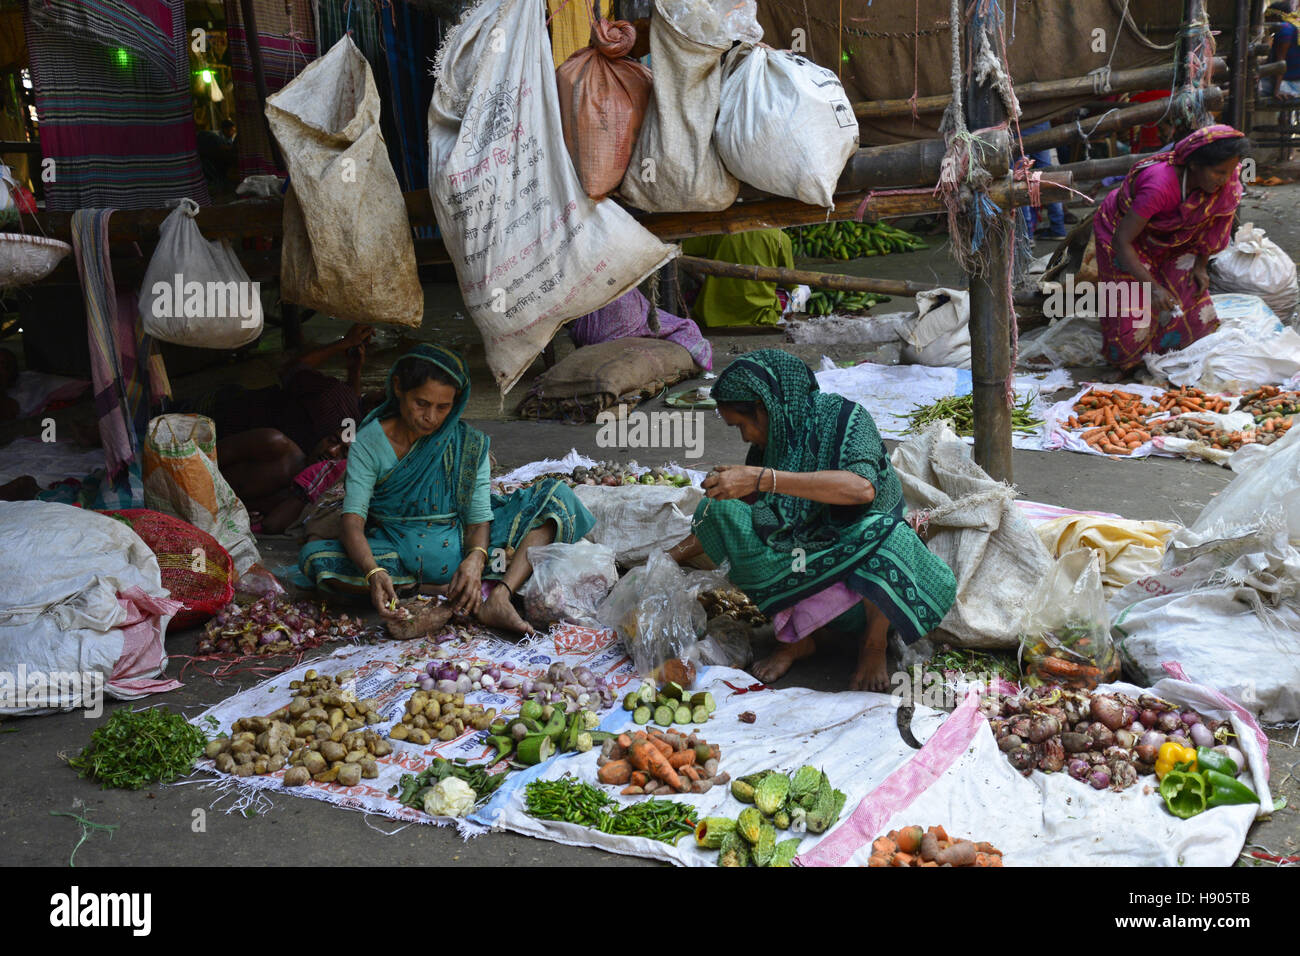 Dhaka, Bangladesh. 17th November 2016. Bangladeshi Women vegetable vendors wait for customer at Karwan Bazar kitchen market in Dhaka, Bangladesh.  Karwan Bazar is one of the largest wholesale Kitchen marketplaces in Dhaka city. It is also one of the largest Kitchen marketplaces in South Asia. As of 2002, the market had 1255 stores, out of which 55 were owned by the Dhaka City Corporation. In 2002, the wholesale market has a daily revenue of 50 million Bangladeshi taka. © Mamunur Rashid/Alamy Live News Stock Photo